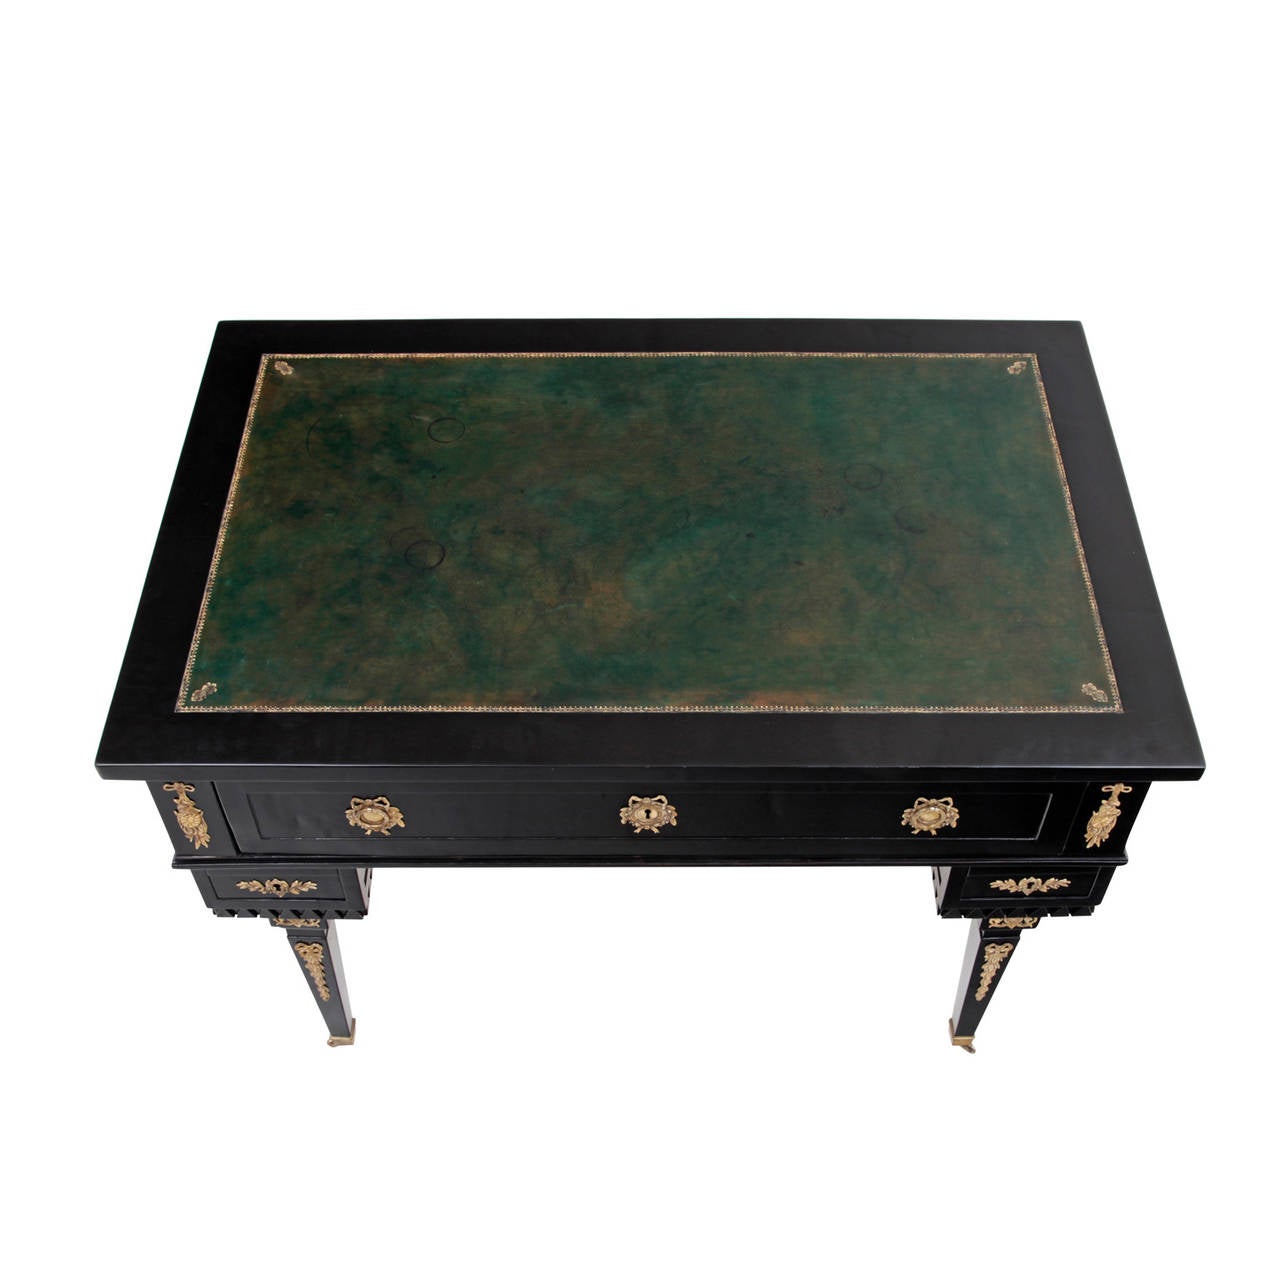 Elegant Bohemia Classicist Writing Desk from the early 19th Century.
The desk is completely ebonised and has a green leather writing top. It stands on four tapered legs with wheels and has one drawer on each side and a broader drawer beneath the